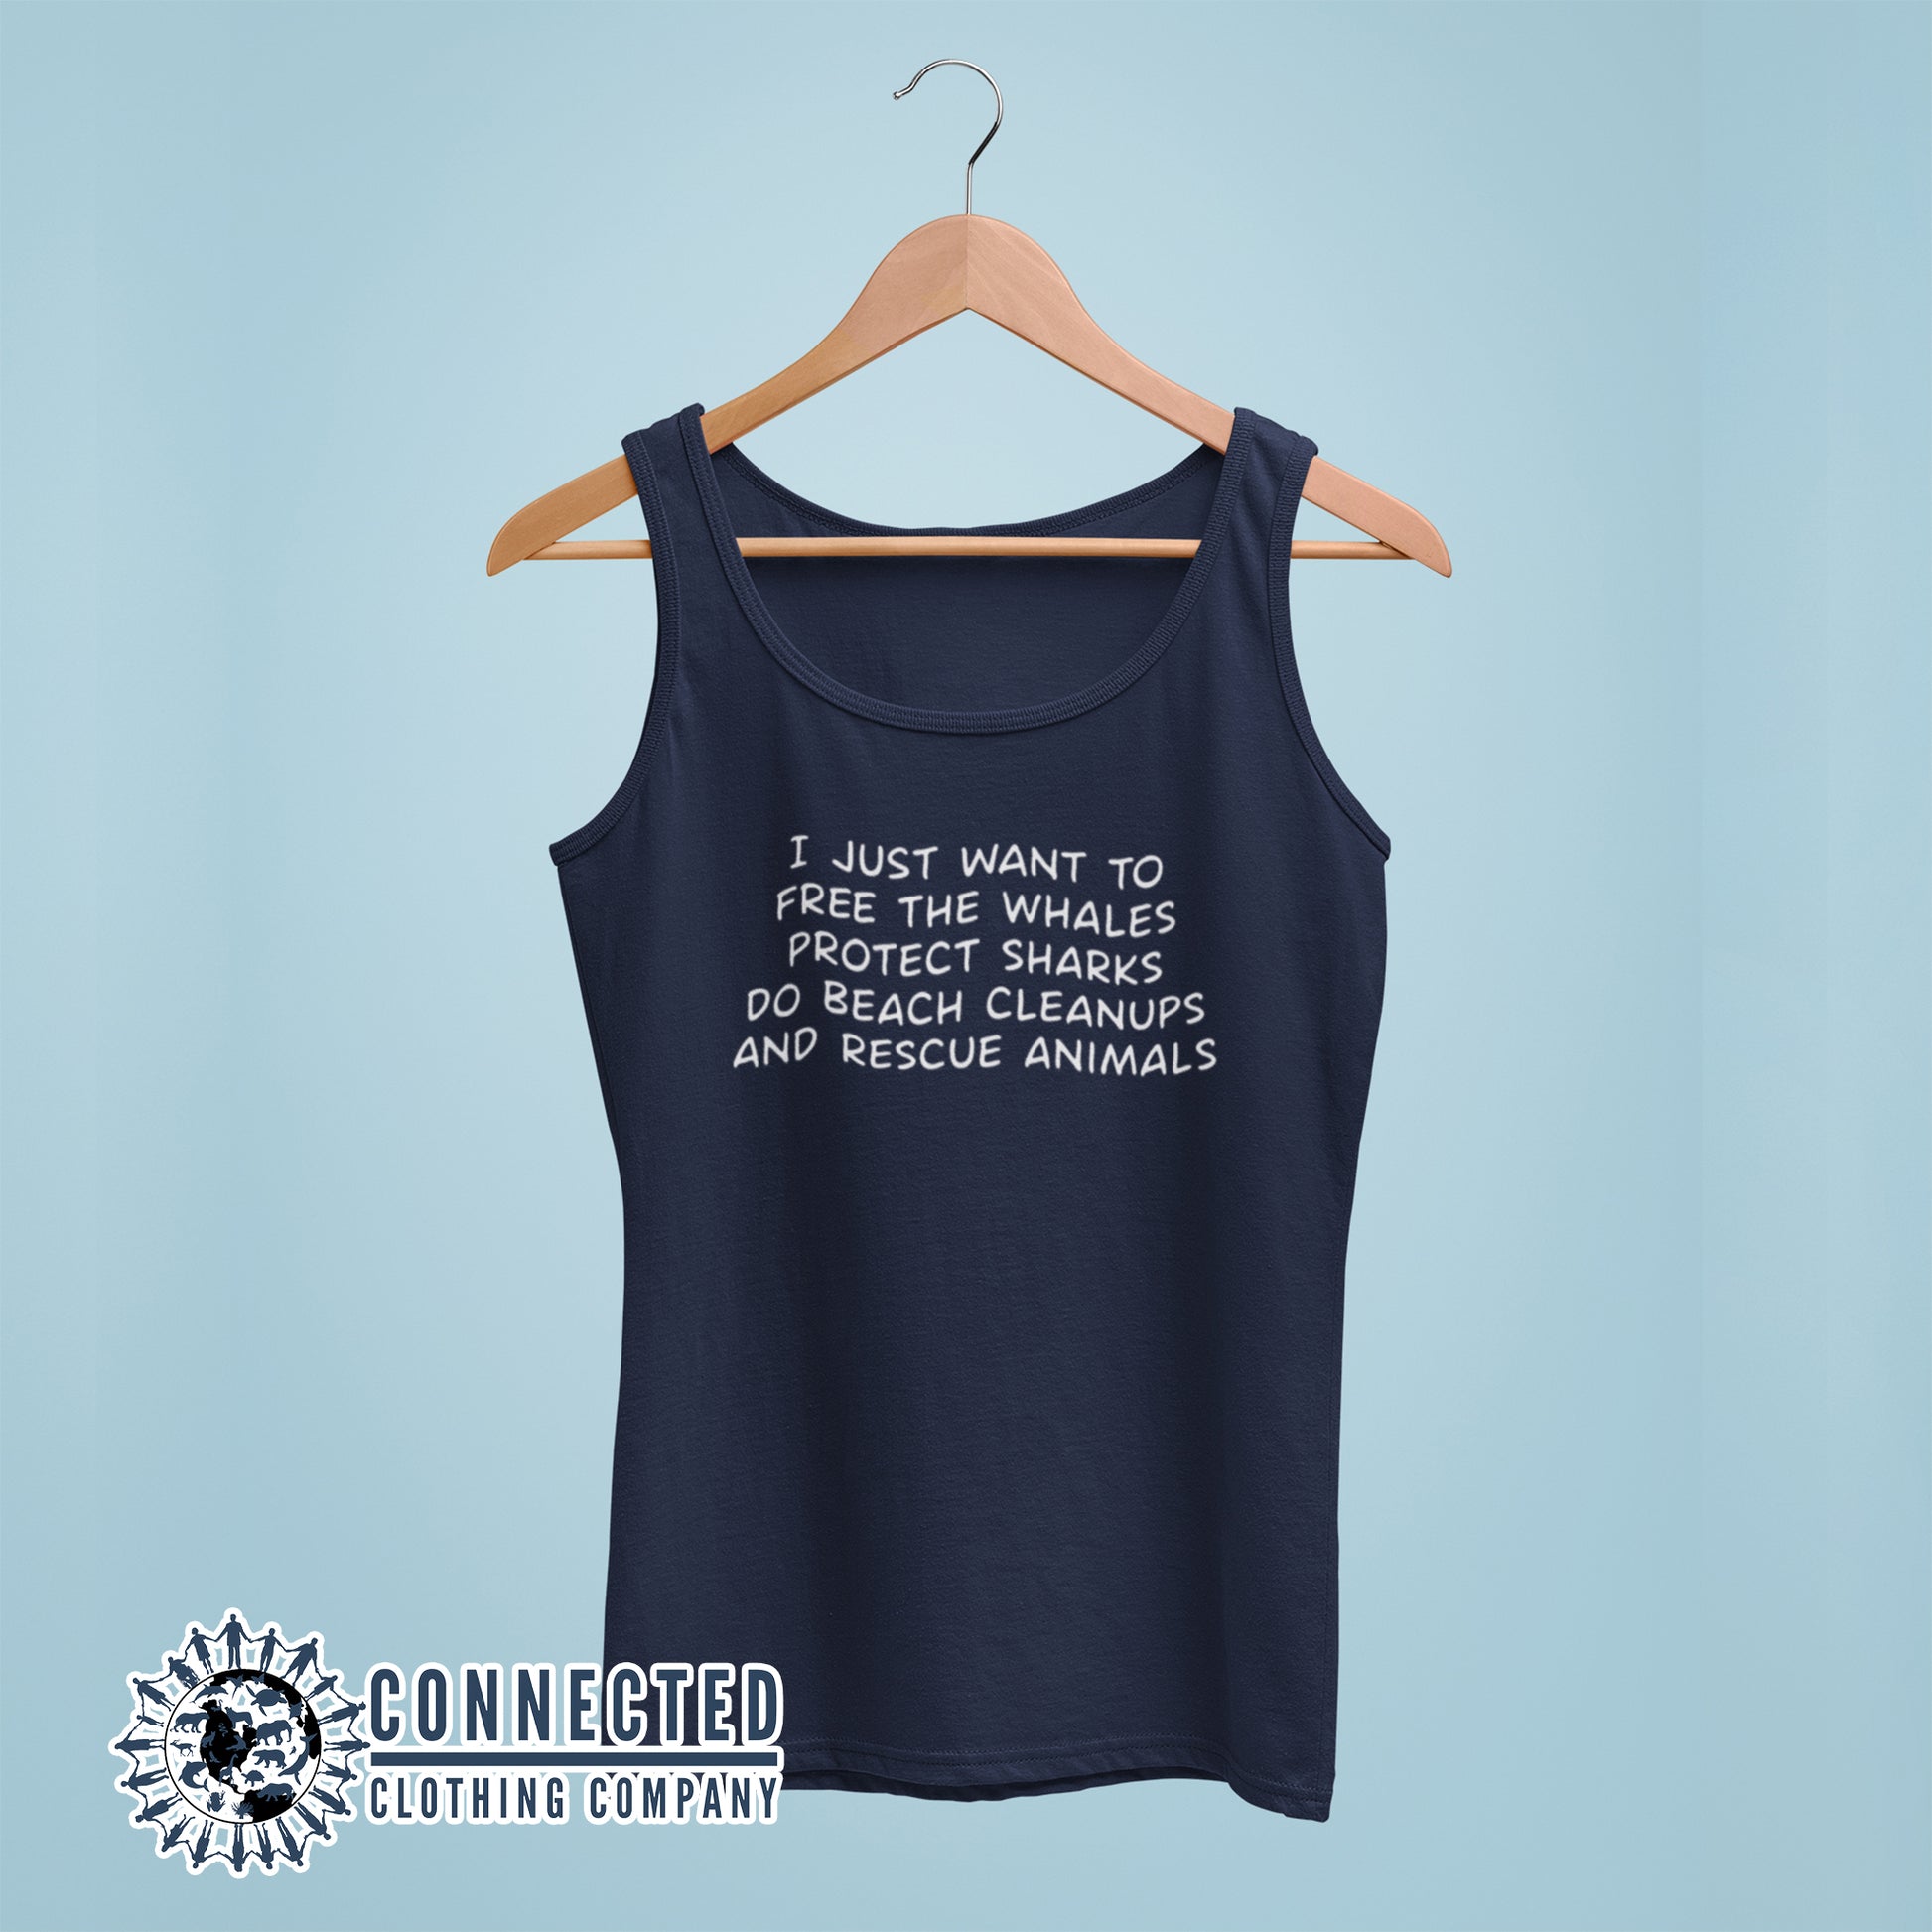 Navy Blue I Just Want To Save The World Women's Tank Top reads "I just want to free the whales, protect sharks, do beach cleanups, and rescue animals" - sweetsherriloudesigns - 10% of profits donated to Mission Blue ocean conservation